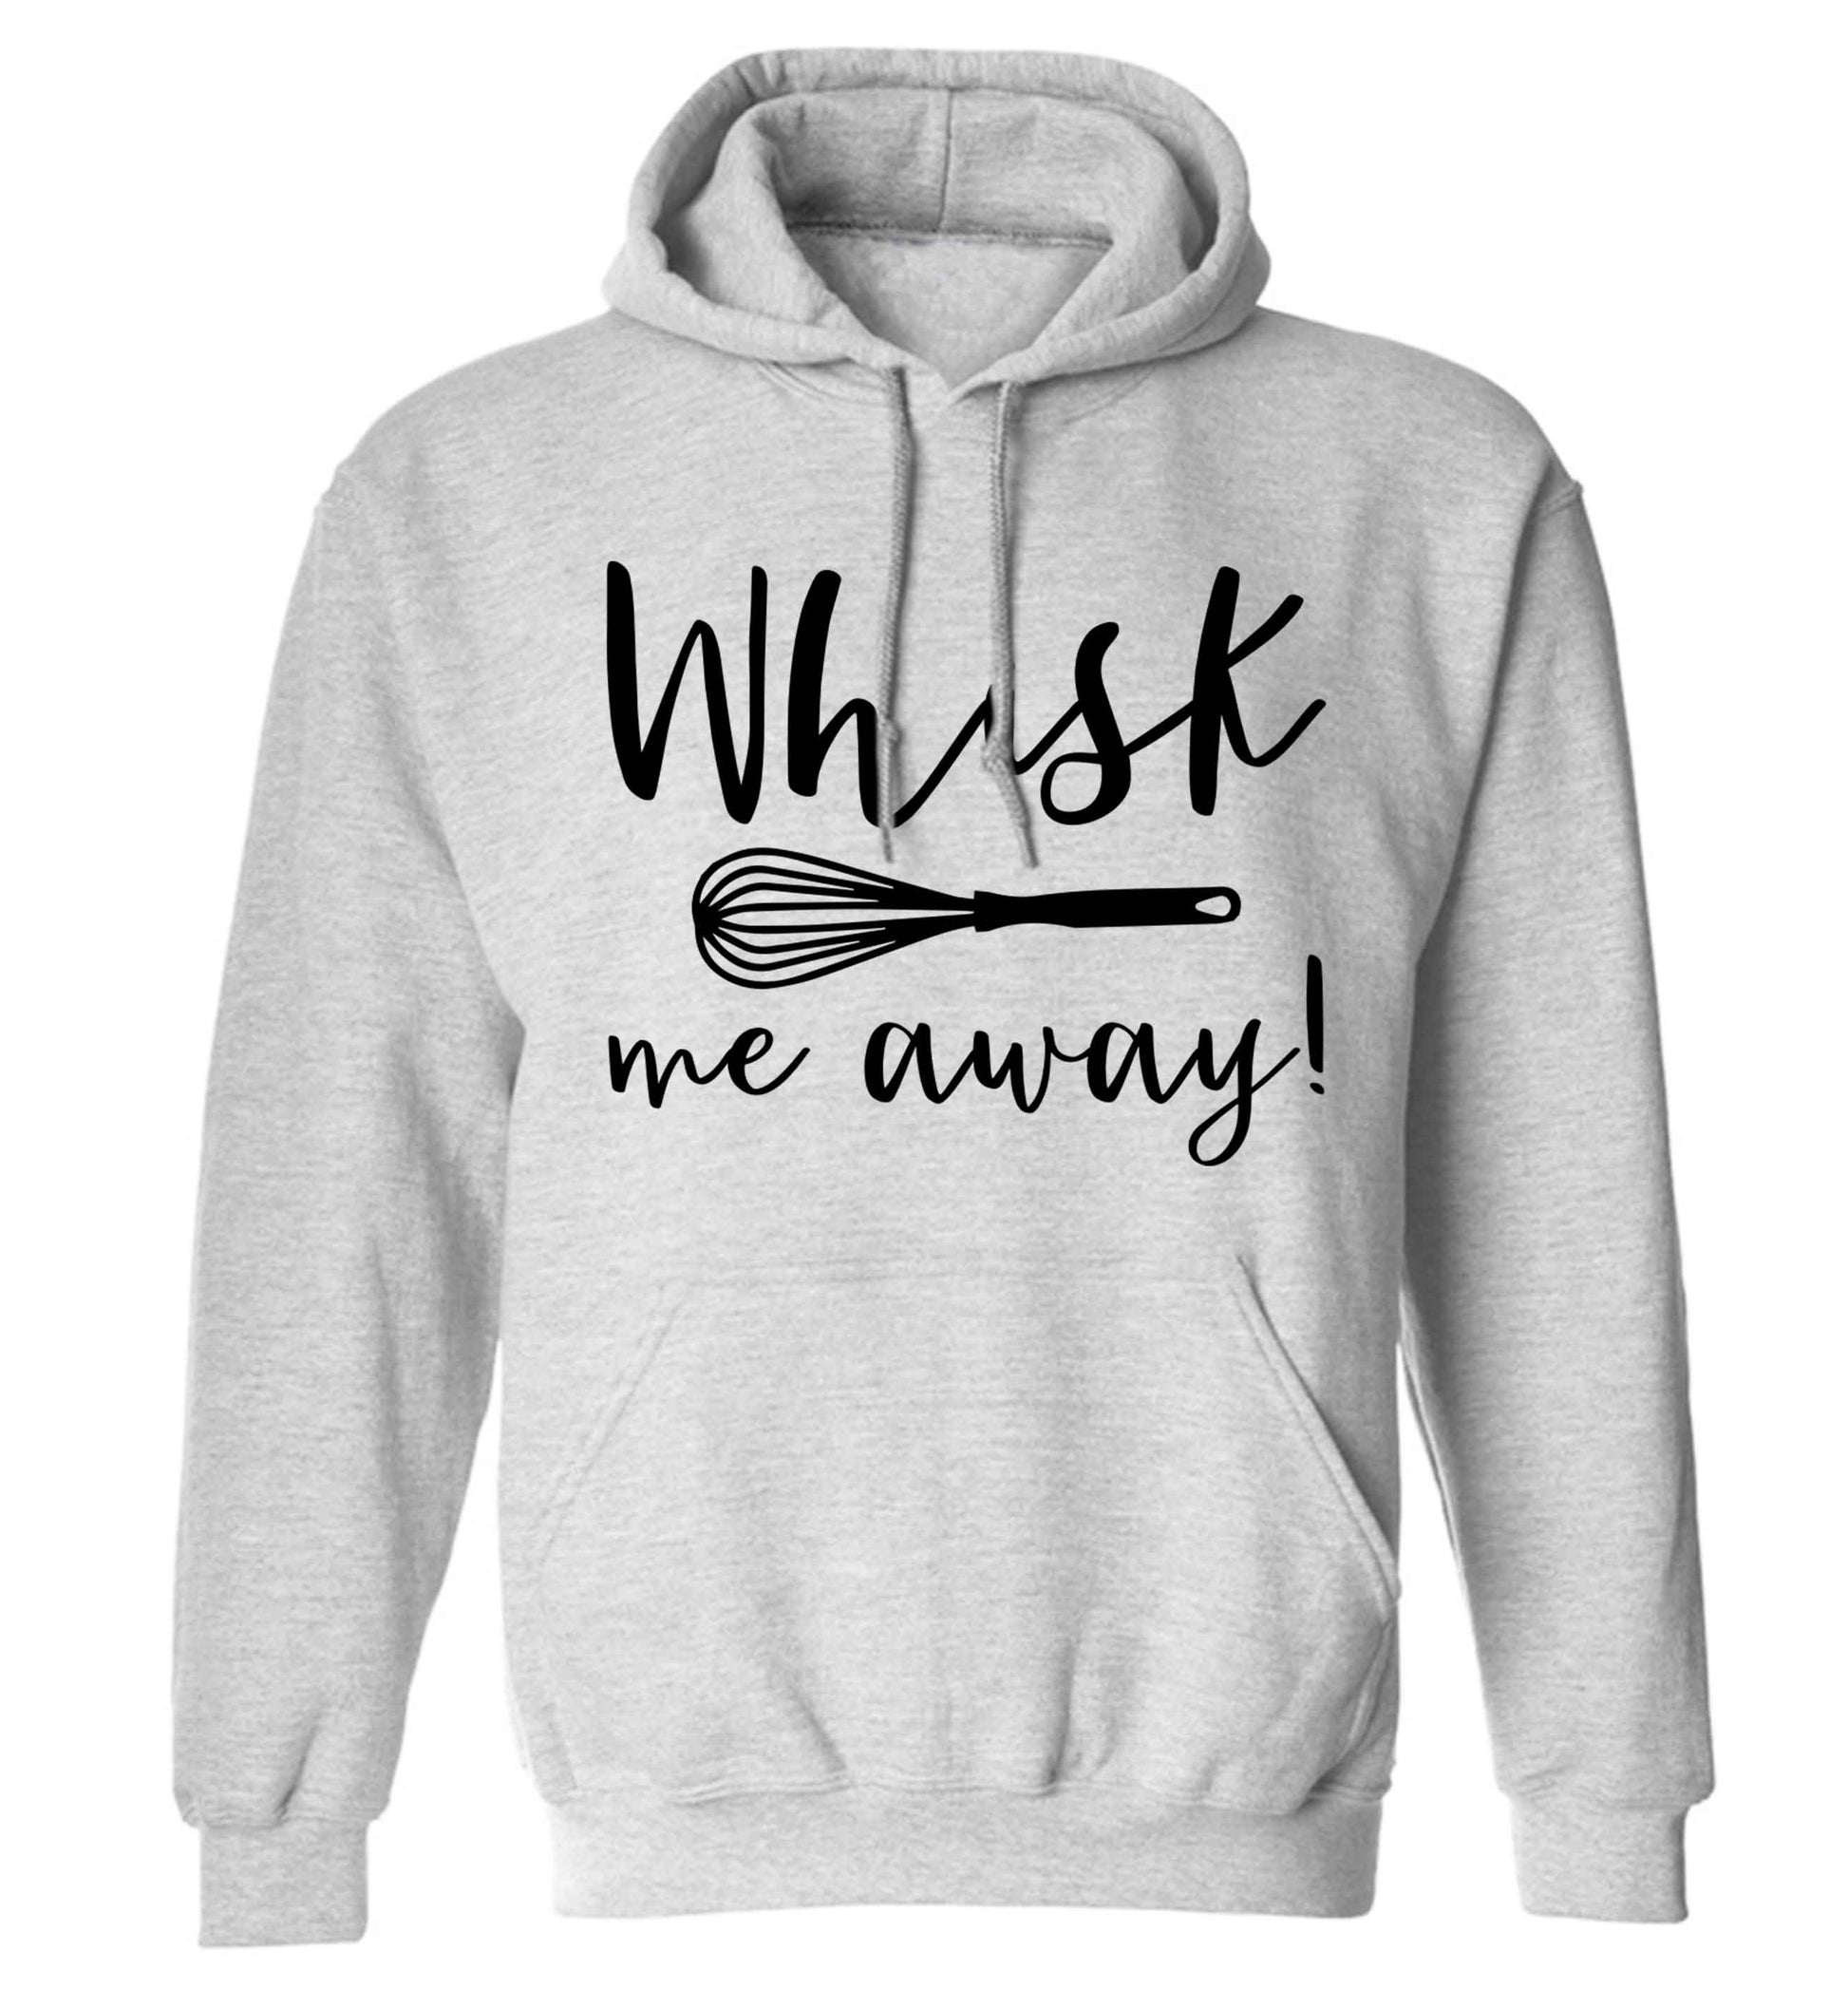 Whisk me away adults unisex grey hoodie 2XL